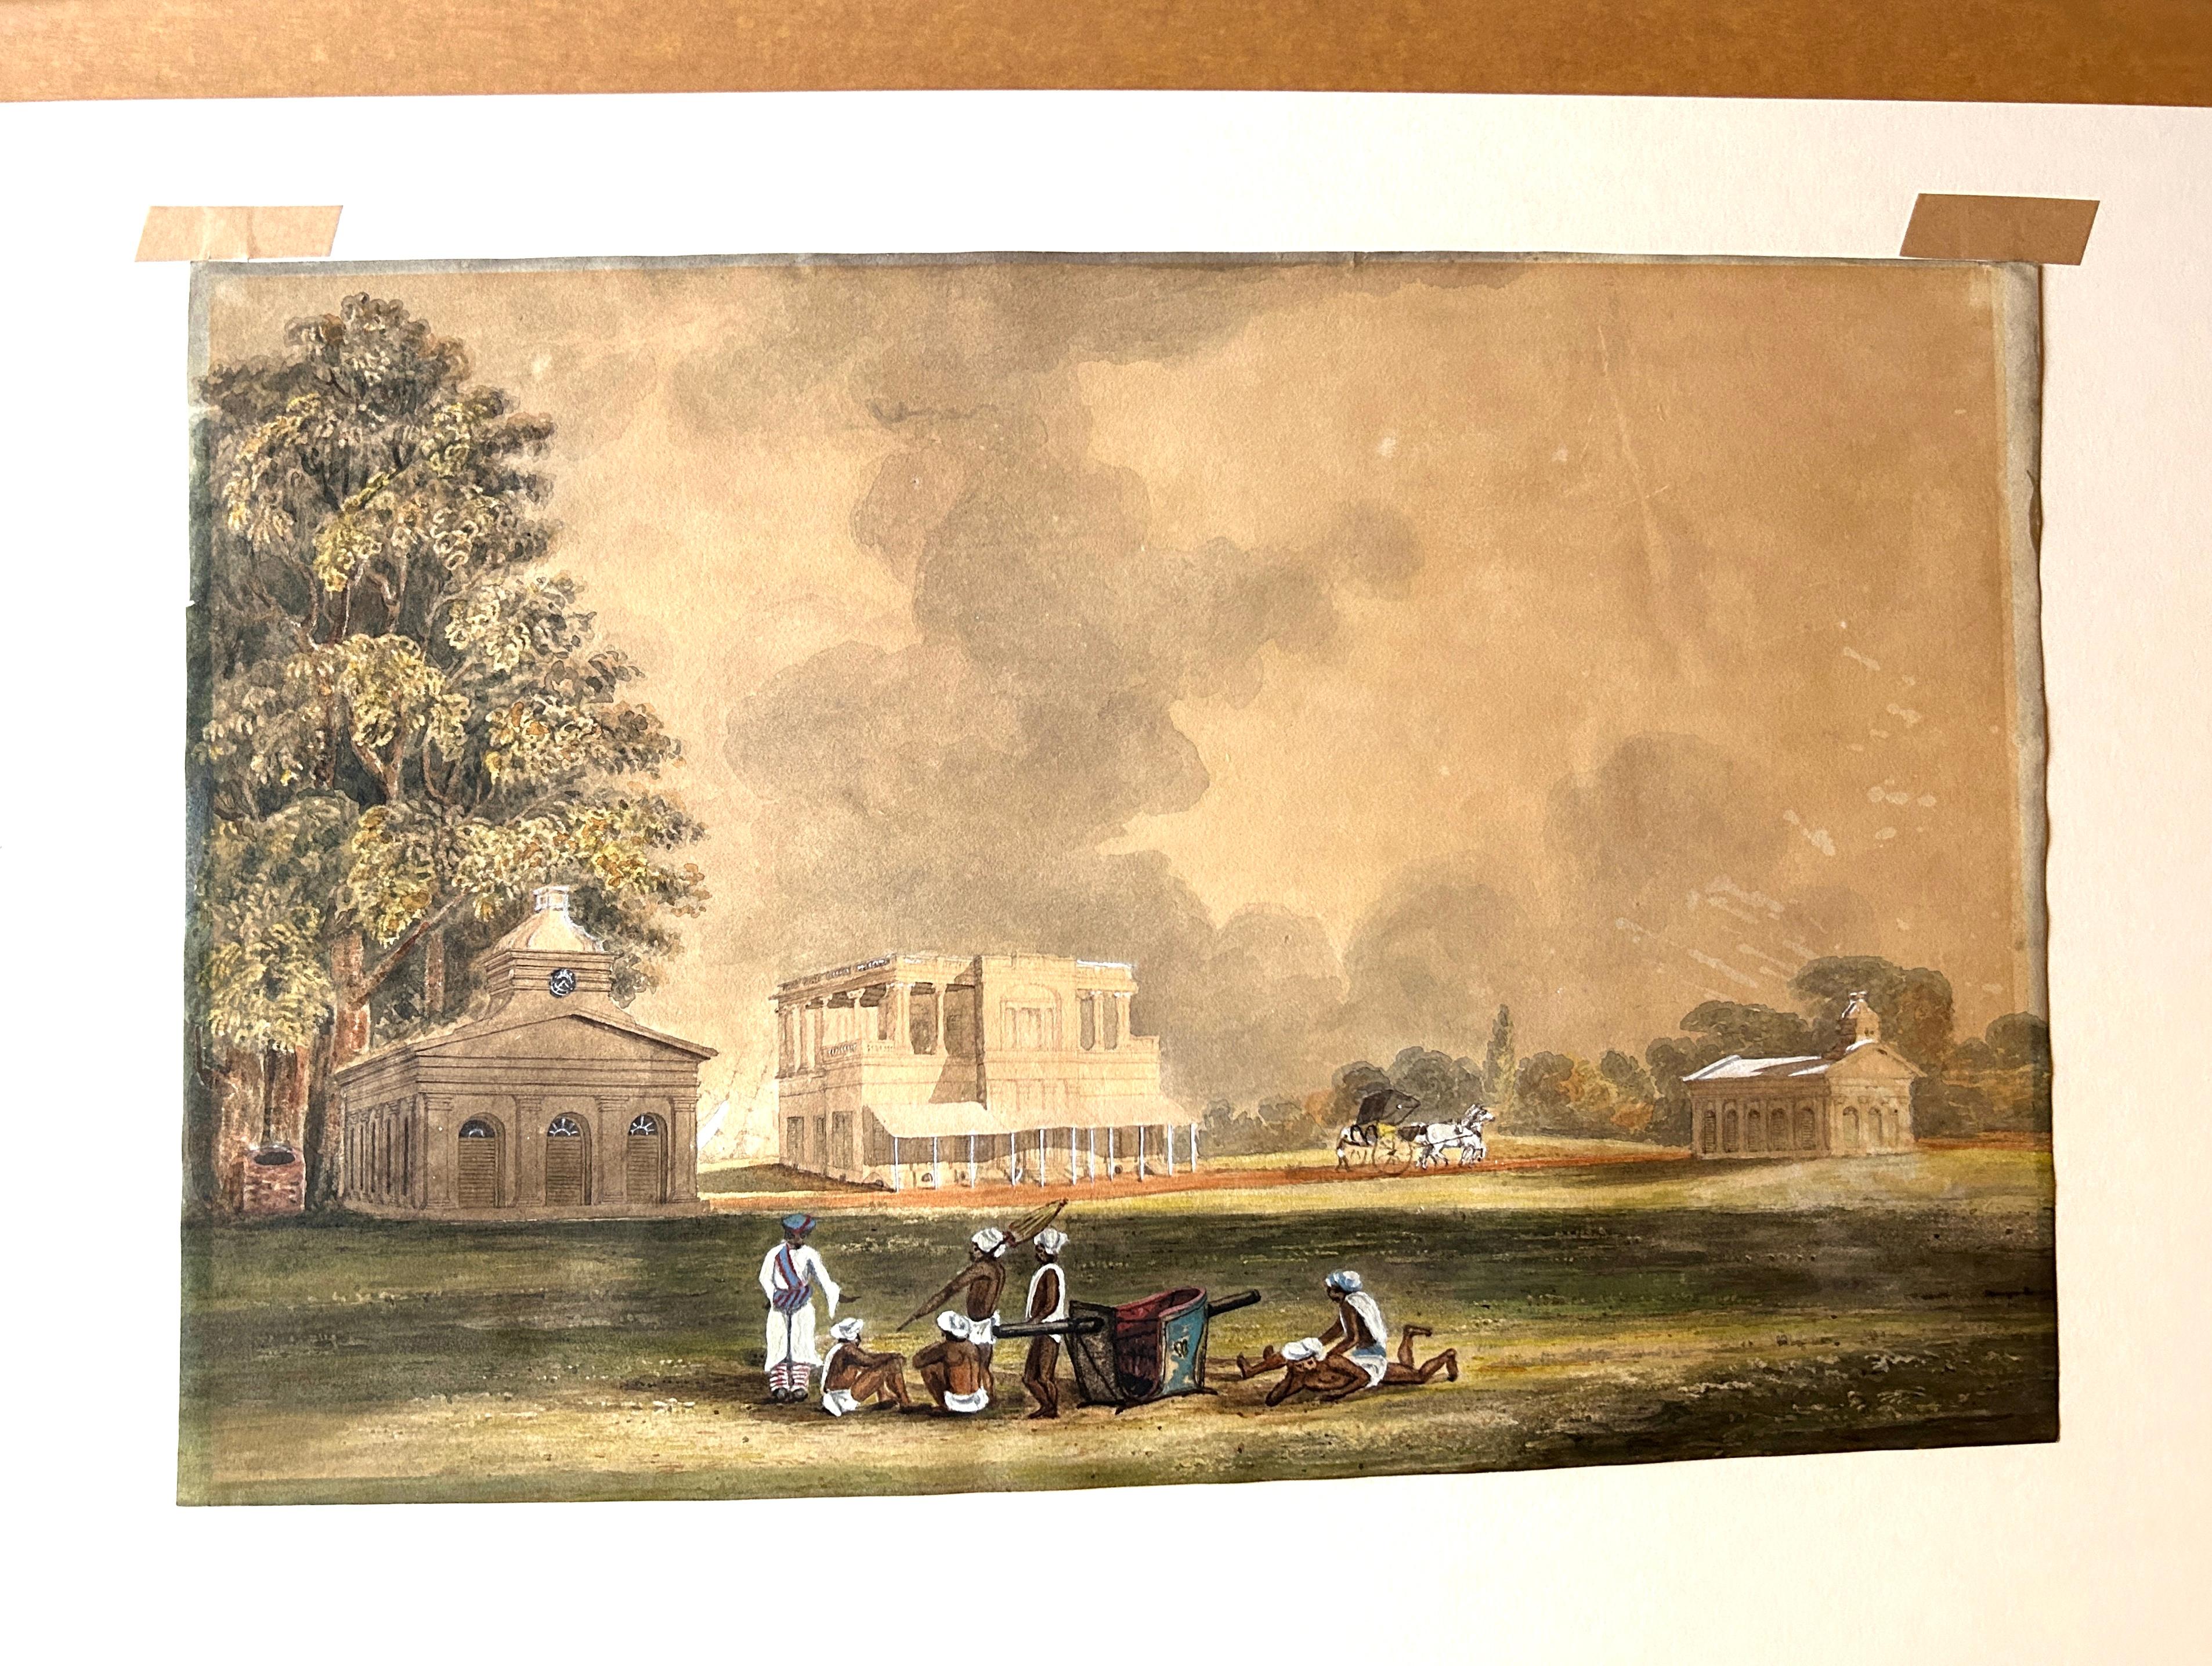 Company School

C 1820
Watercolour on Paper
Image Size: 31 x 47 cm
Frame Size: 49.5 x 65 cm
Label Verso Abbott & Holder, London

A fabulous and intriguing early, large watercolour, by an Indian artist. This painting warrants further research.

The